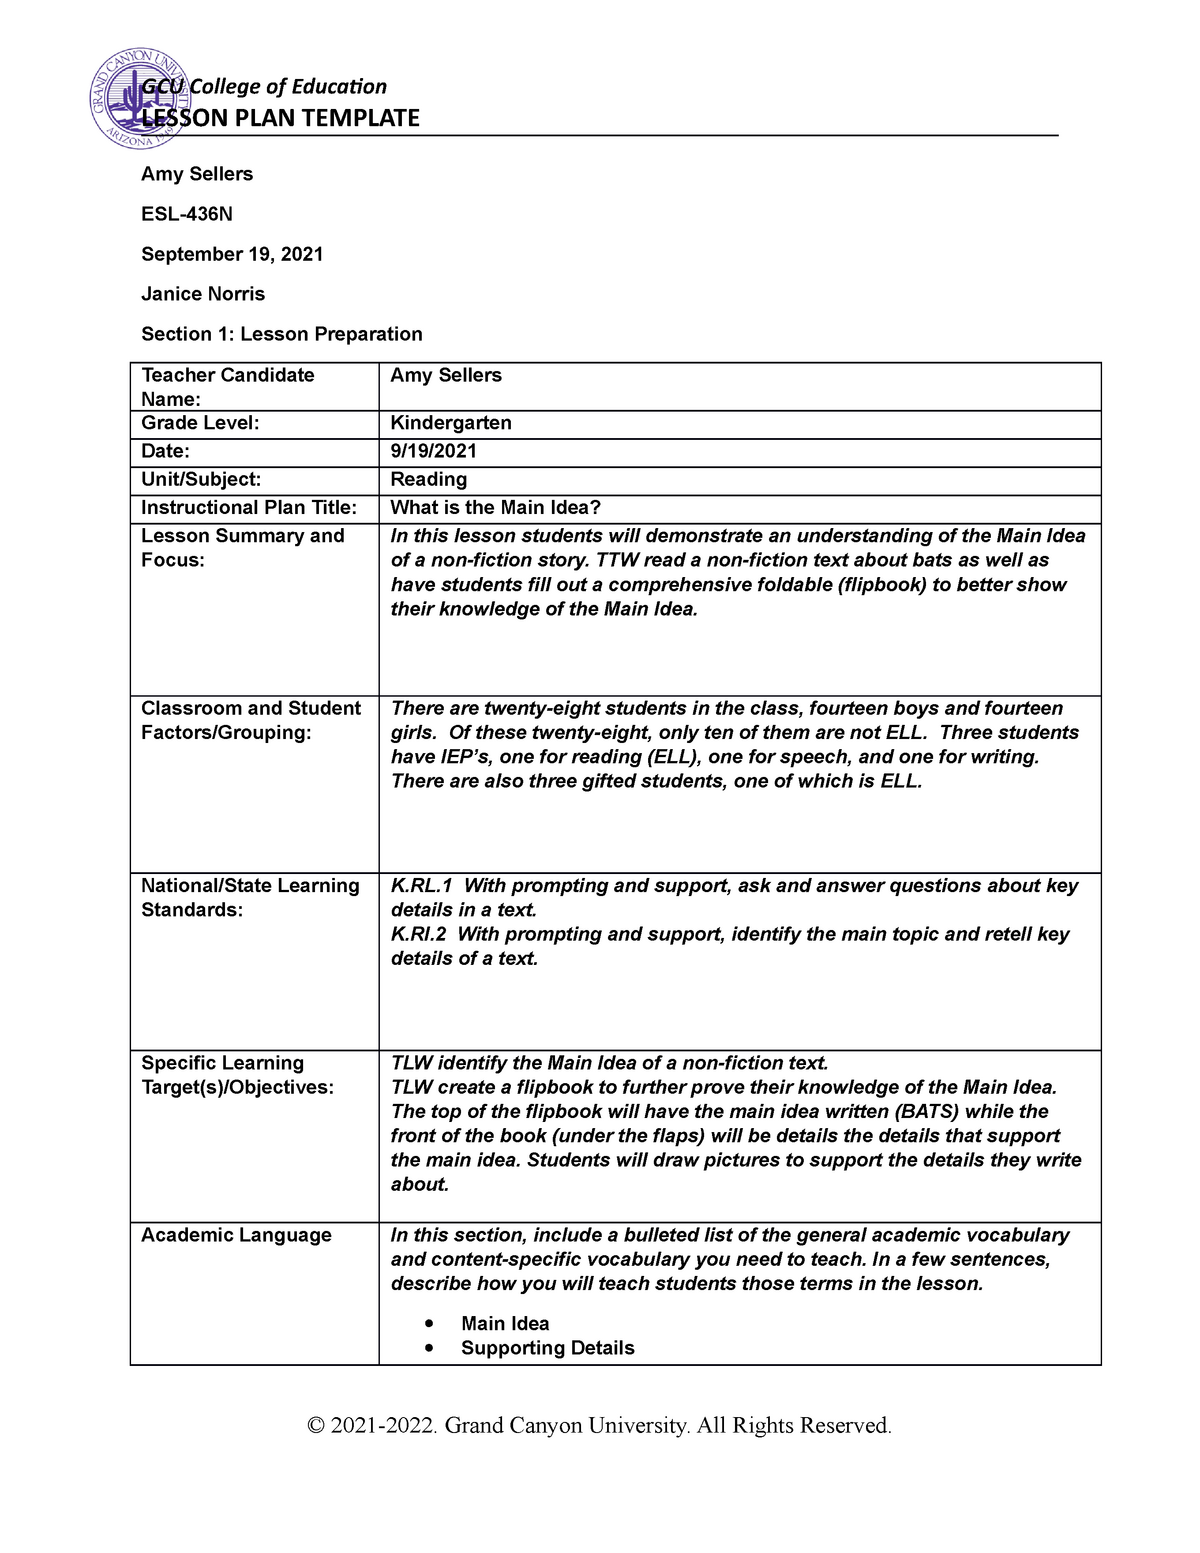 lesson-planning-with-universal-design-for-learning-lesson-plan-template-amy-sellers-esl-436n